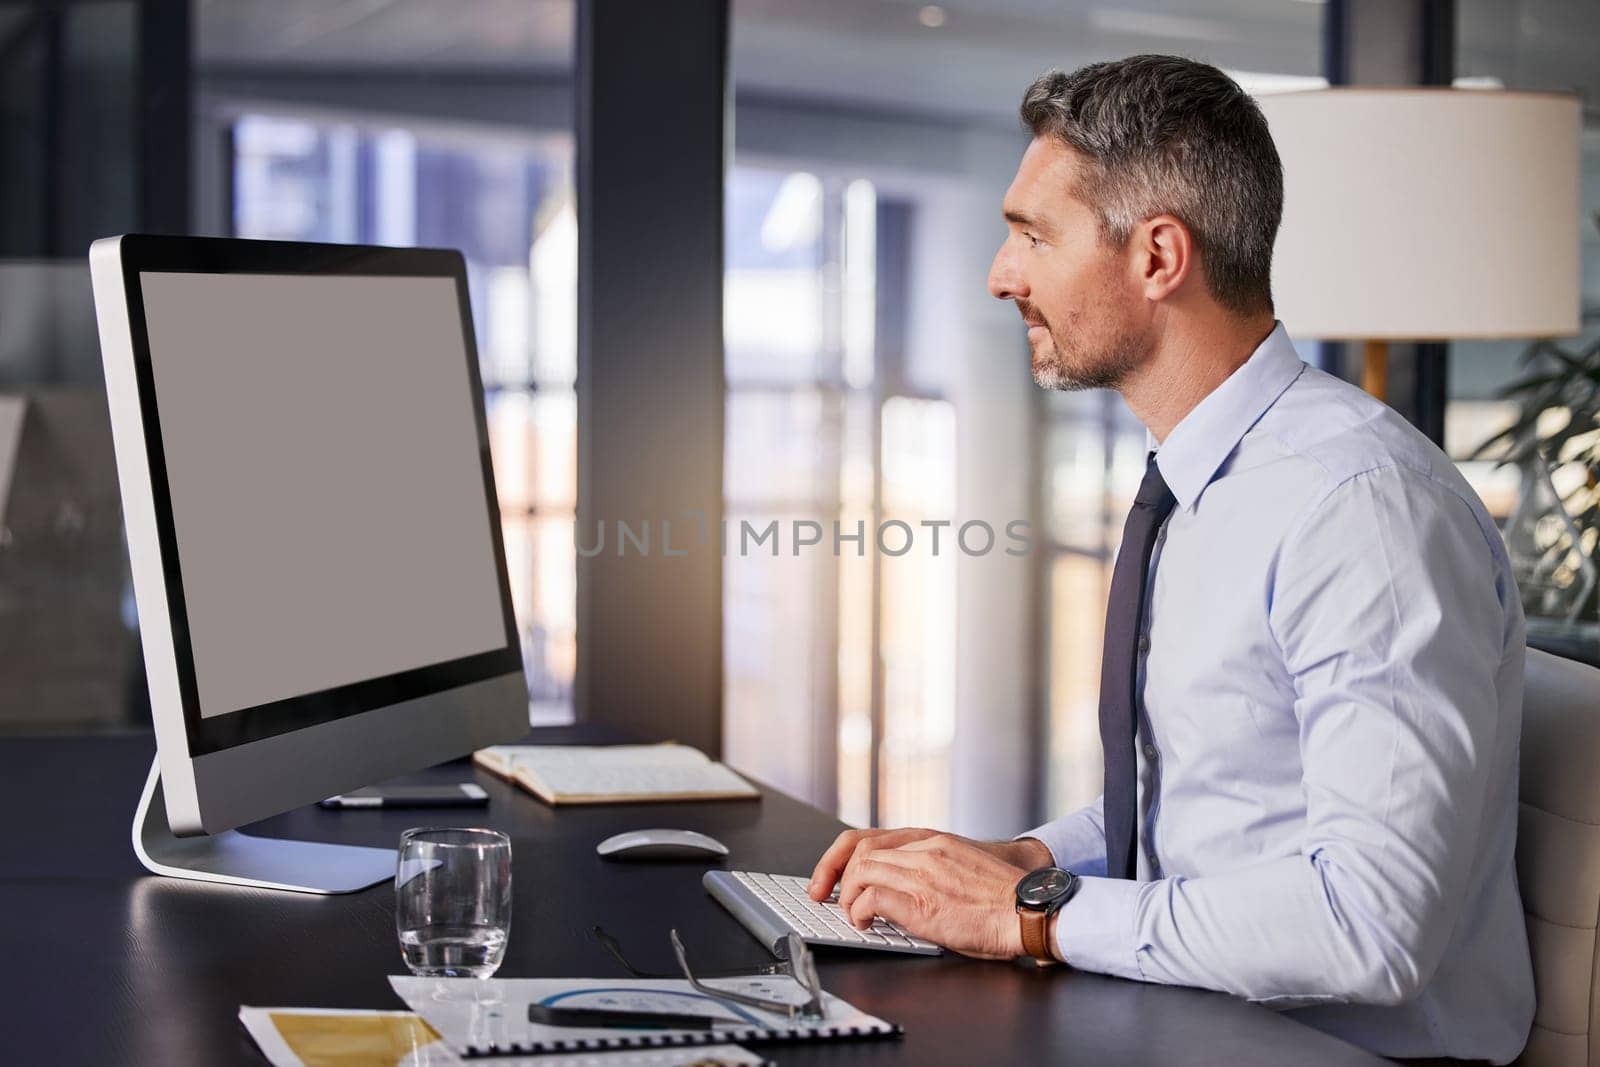 Computer, email and report with a business man typing while sitting at a desk in his office at work. Planning, research and technology with a male manager working online for finance or accounting.